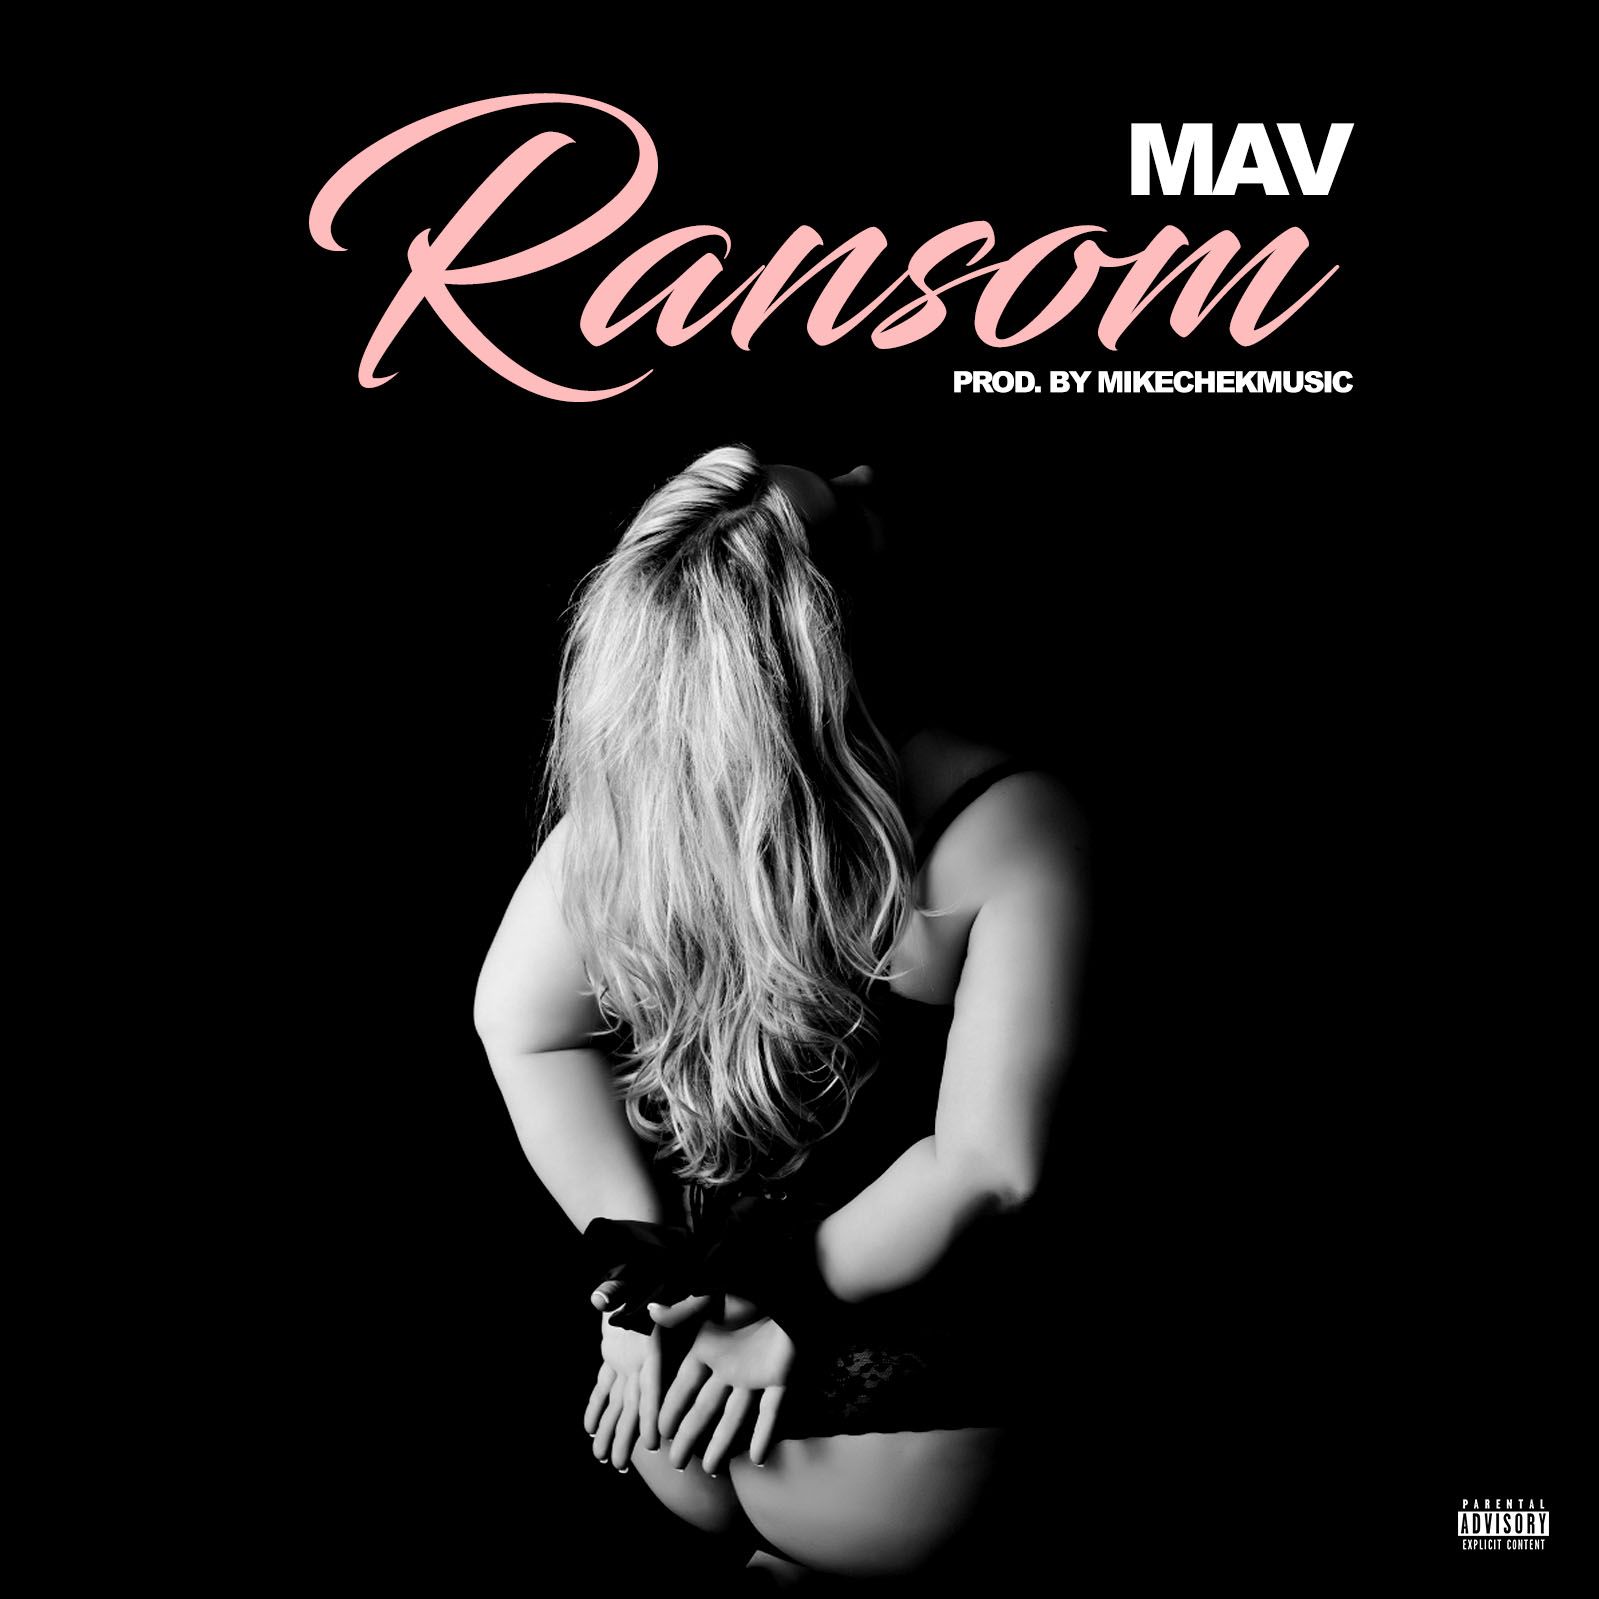 All Tied Up, Mav Is Kidnapping For The “Ransom” On New Single